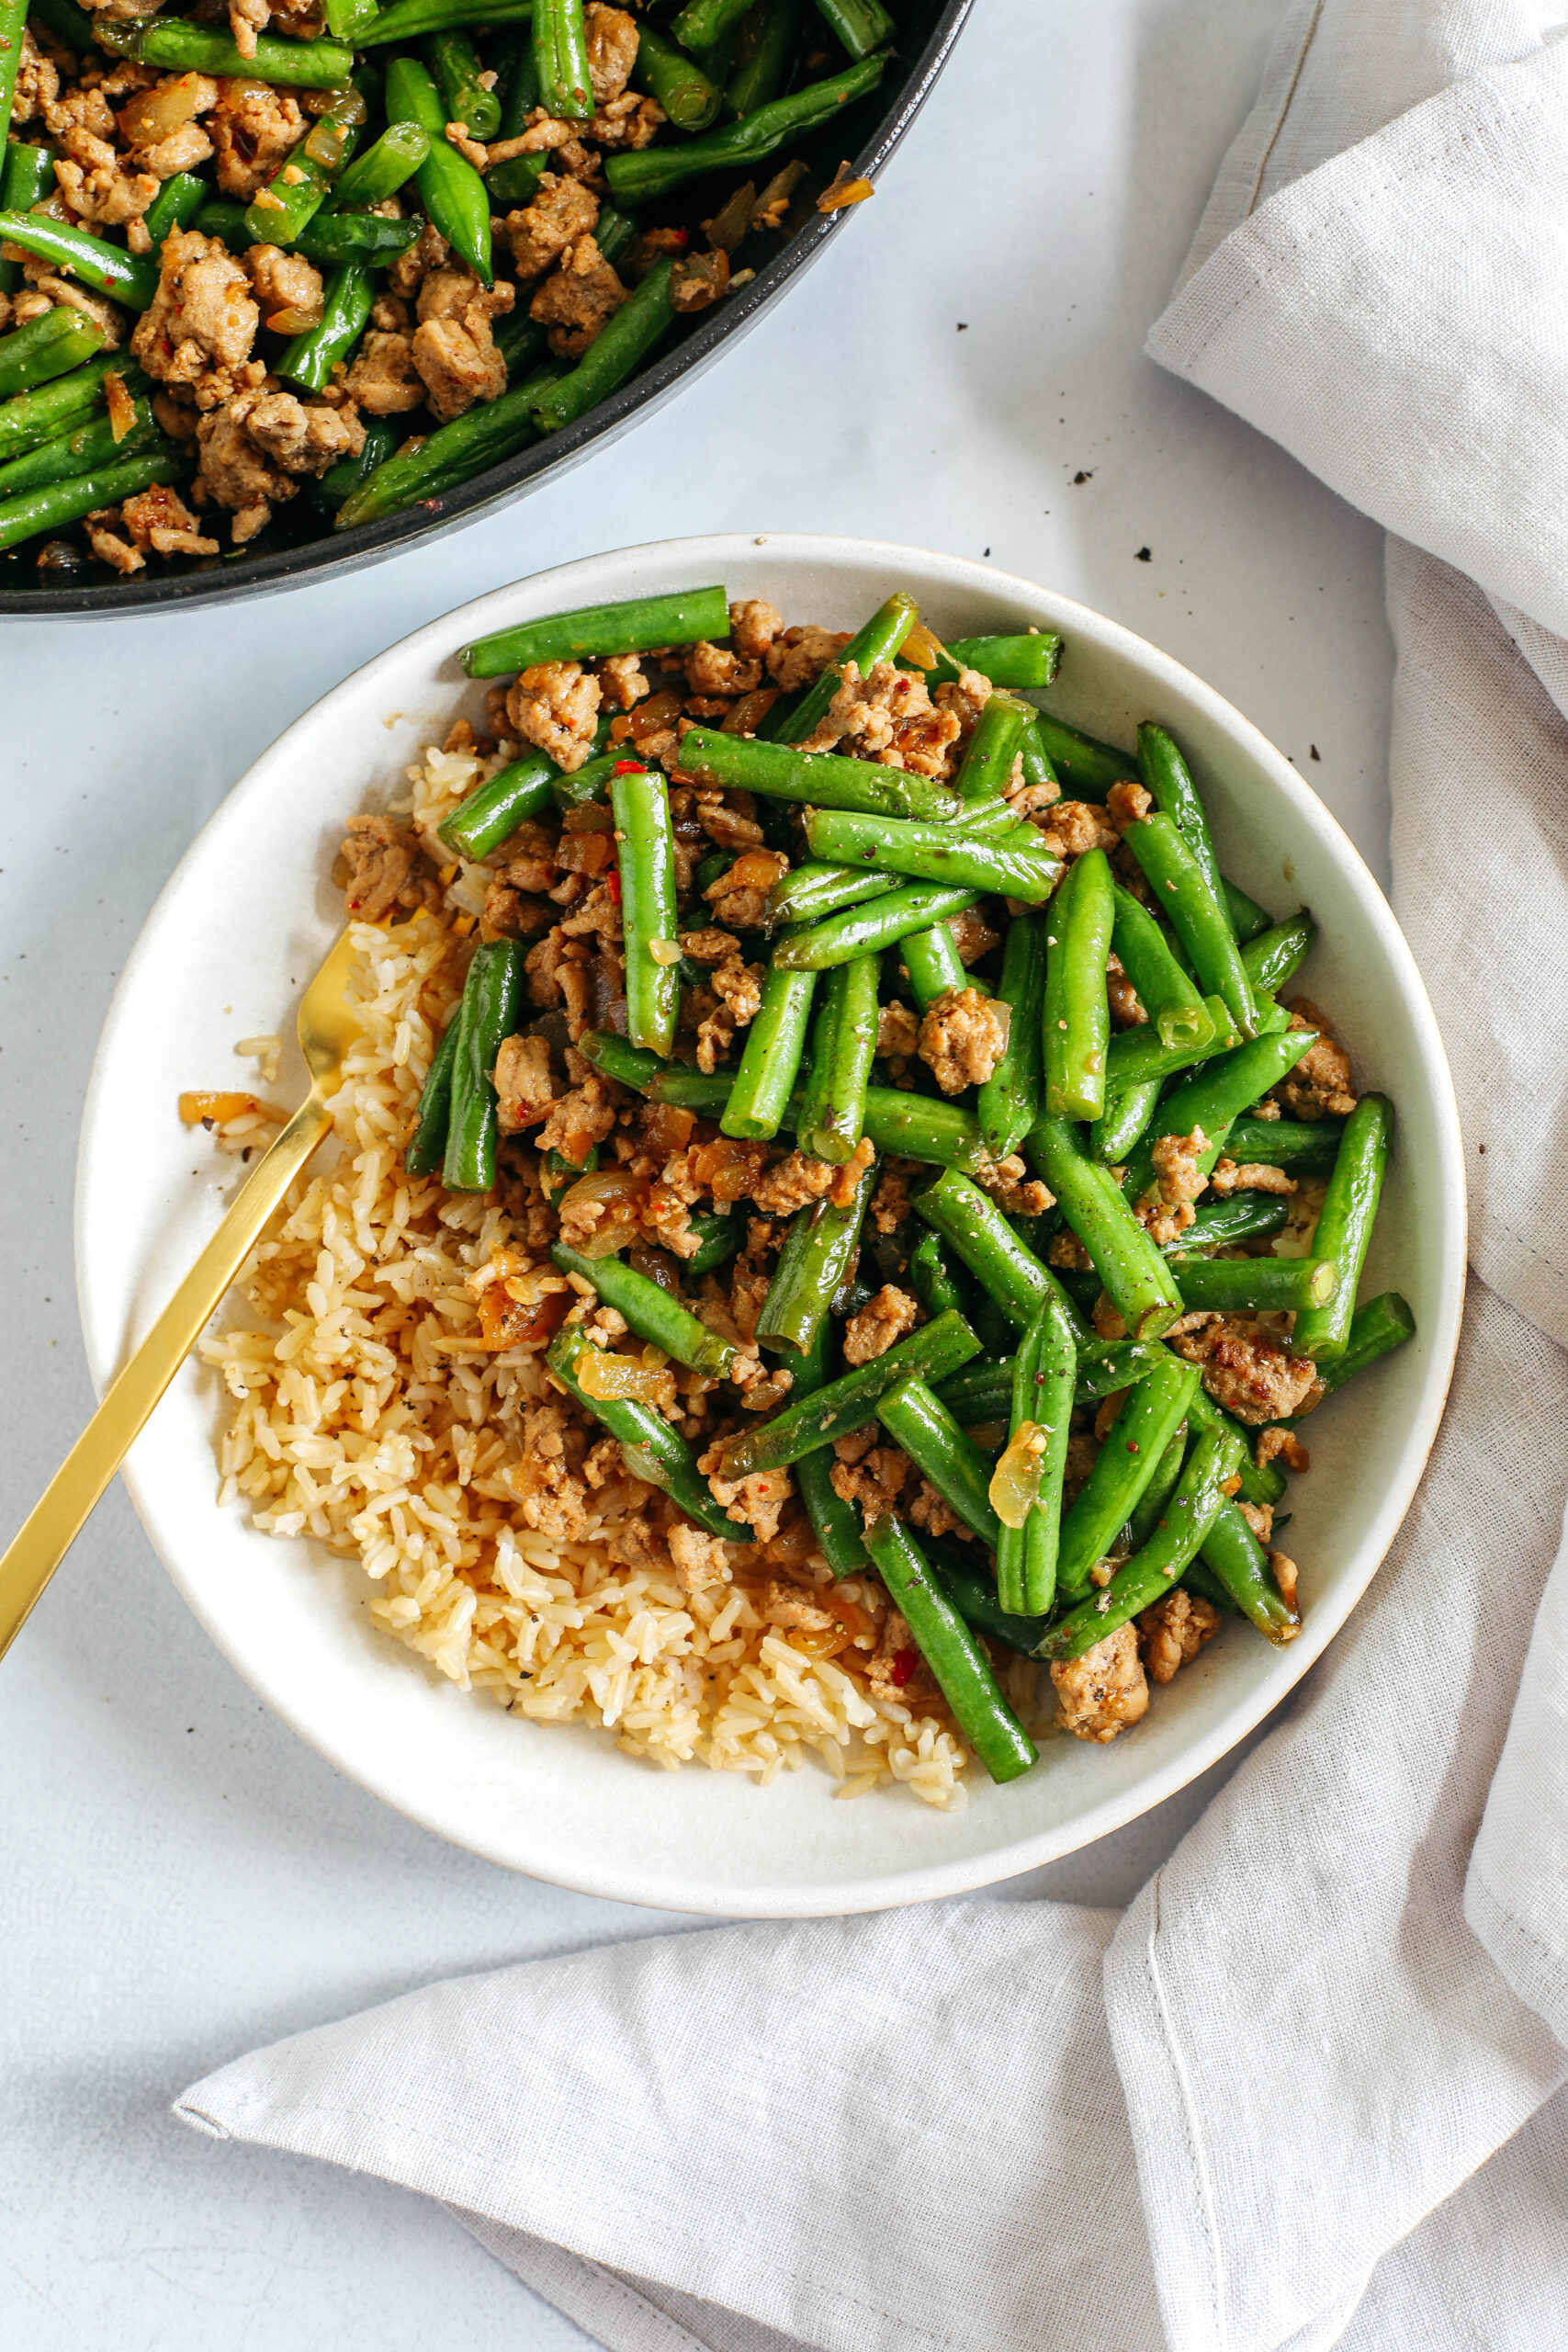 Quick and flavorful Ground Turkey and Green Bean Stir Fry easily made in under 20 minutes all in one pan!  Lean ground turkey with crisp green beans all tossed together in the most delicious Asian-inspired sauce that's better than take-out!